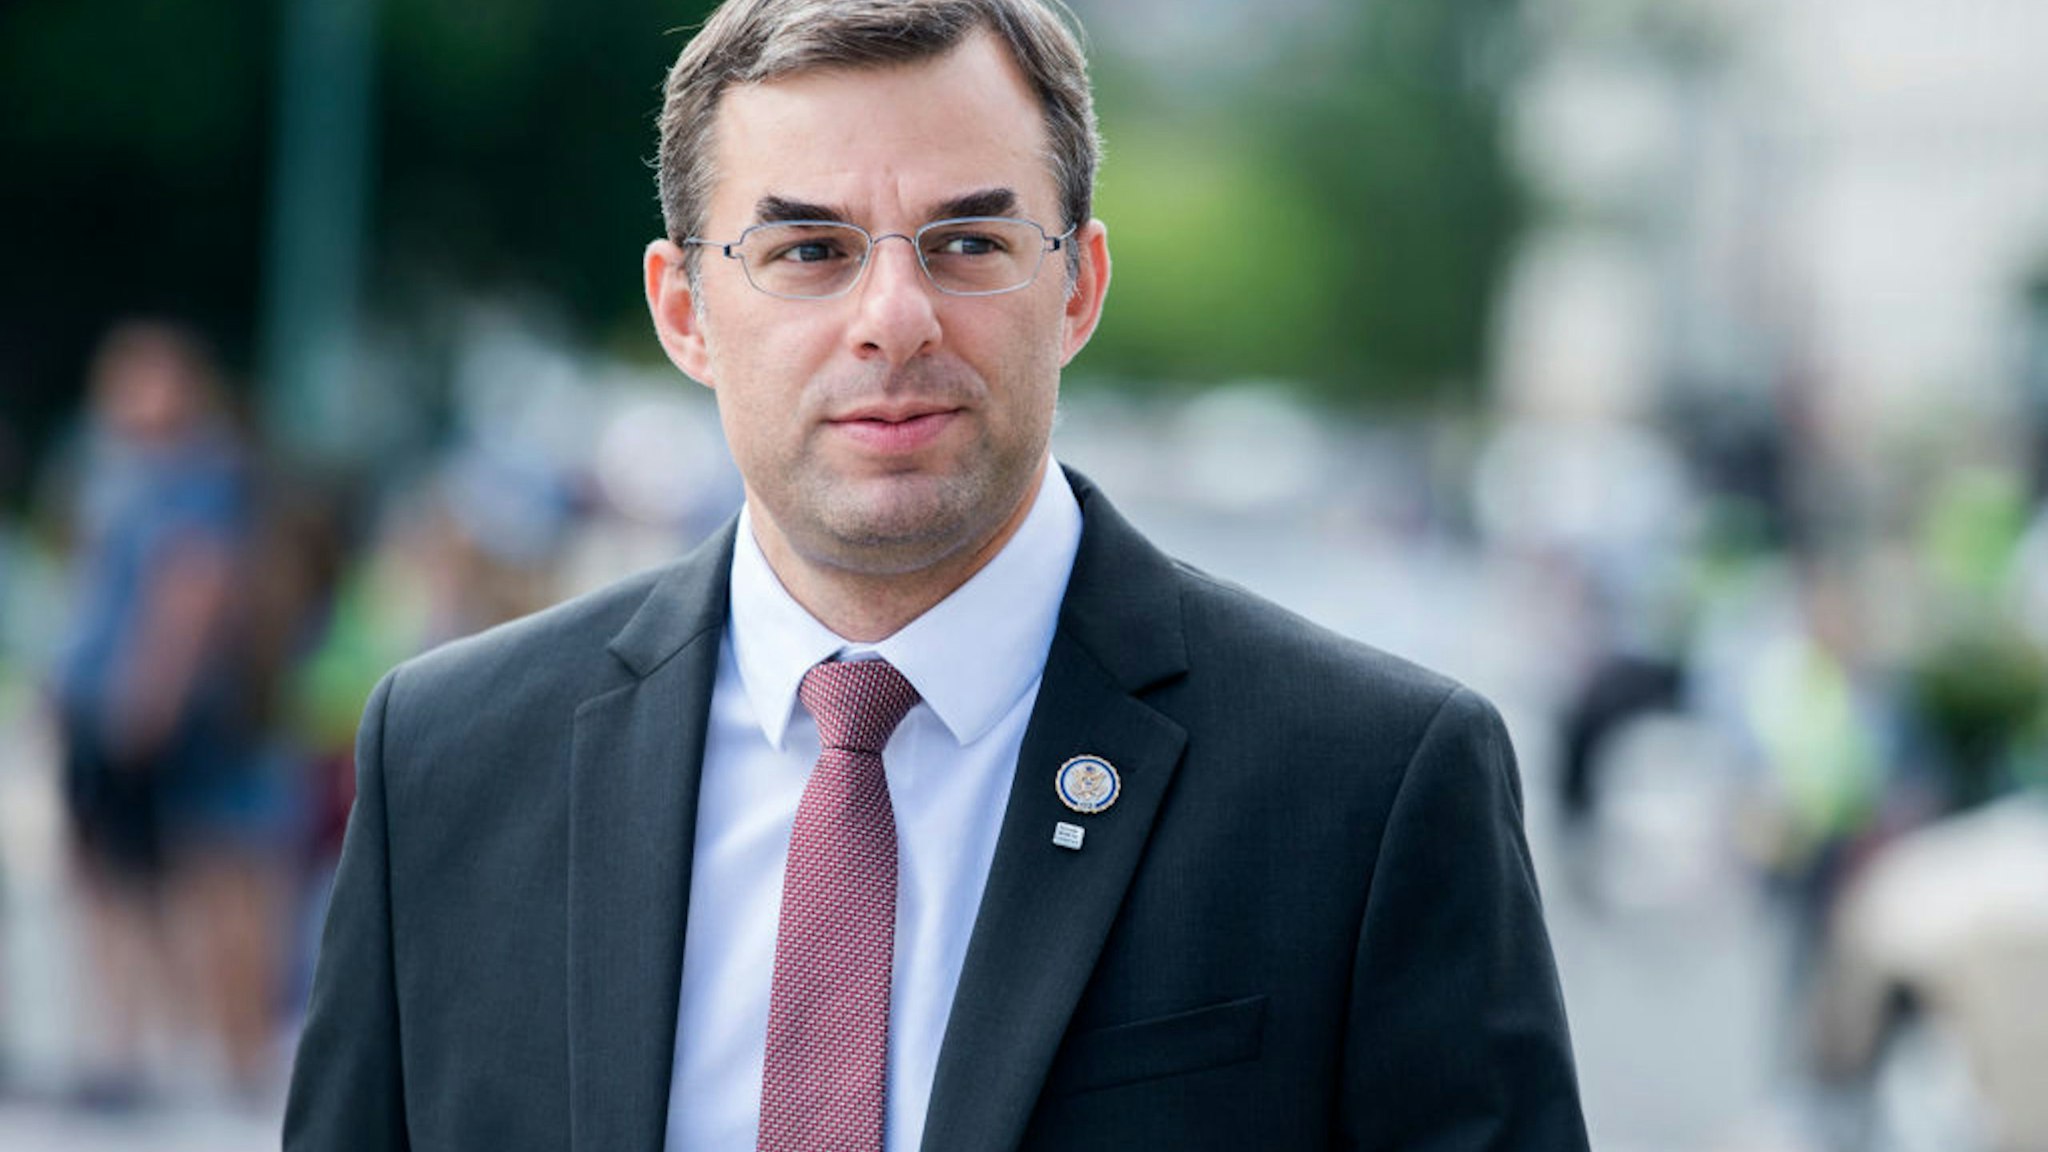 UNITED STATES - MAY 23: Rep. Justin Amash, R-Mich., makes his way to the Capitol before the last votes of the week on Thursday, May 23, 2019